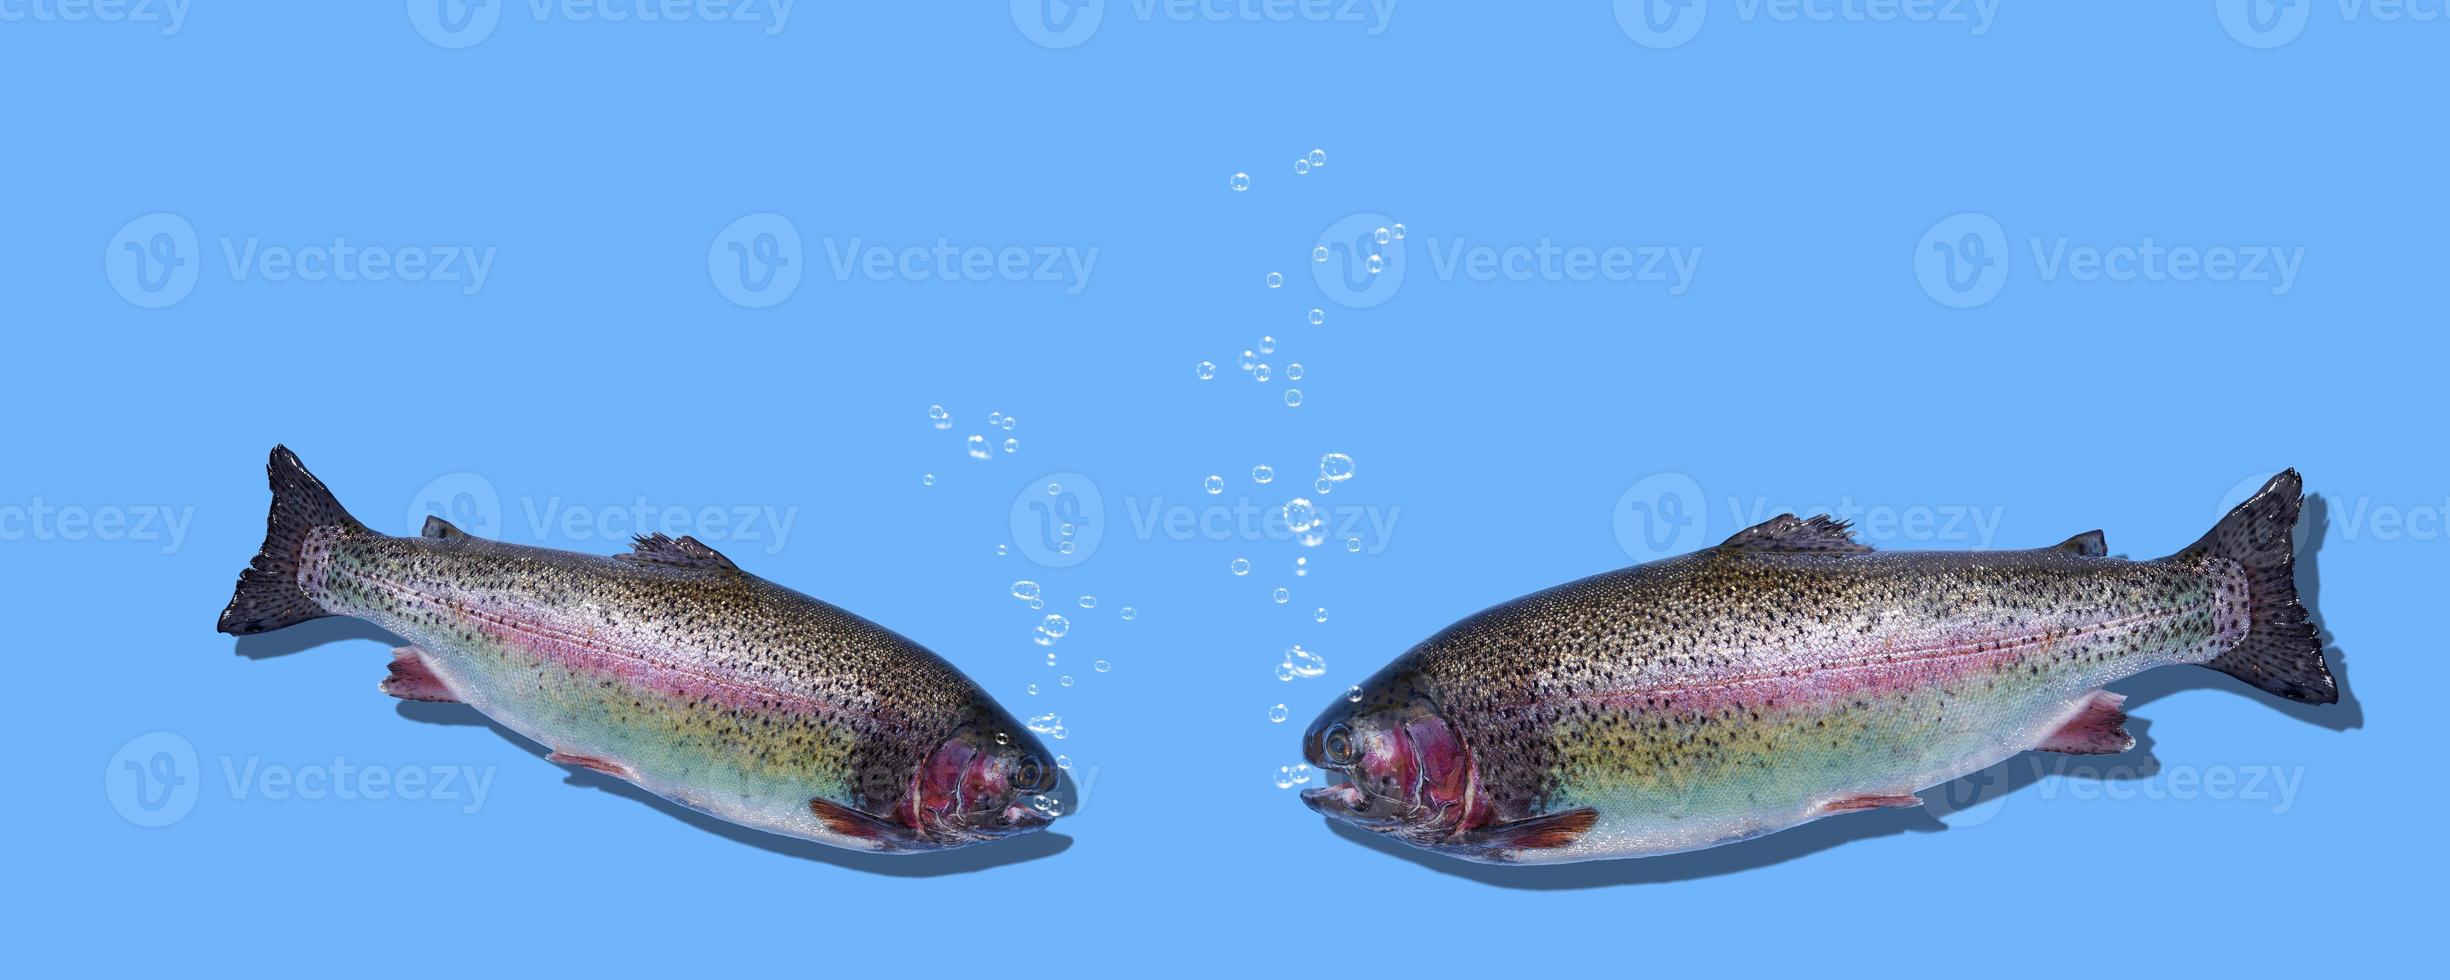 Two floating rainbow trout closeup isolated on blue background. The fishes breathes and bubbles rise. Photo with copy space.